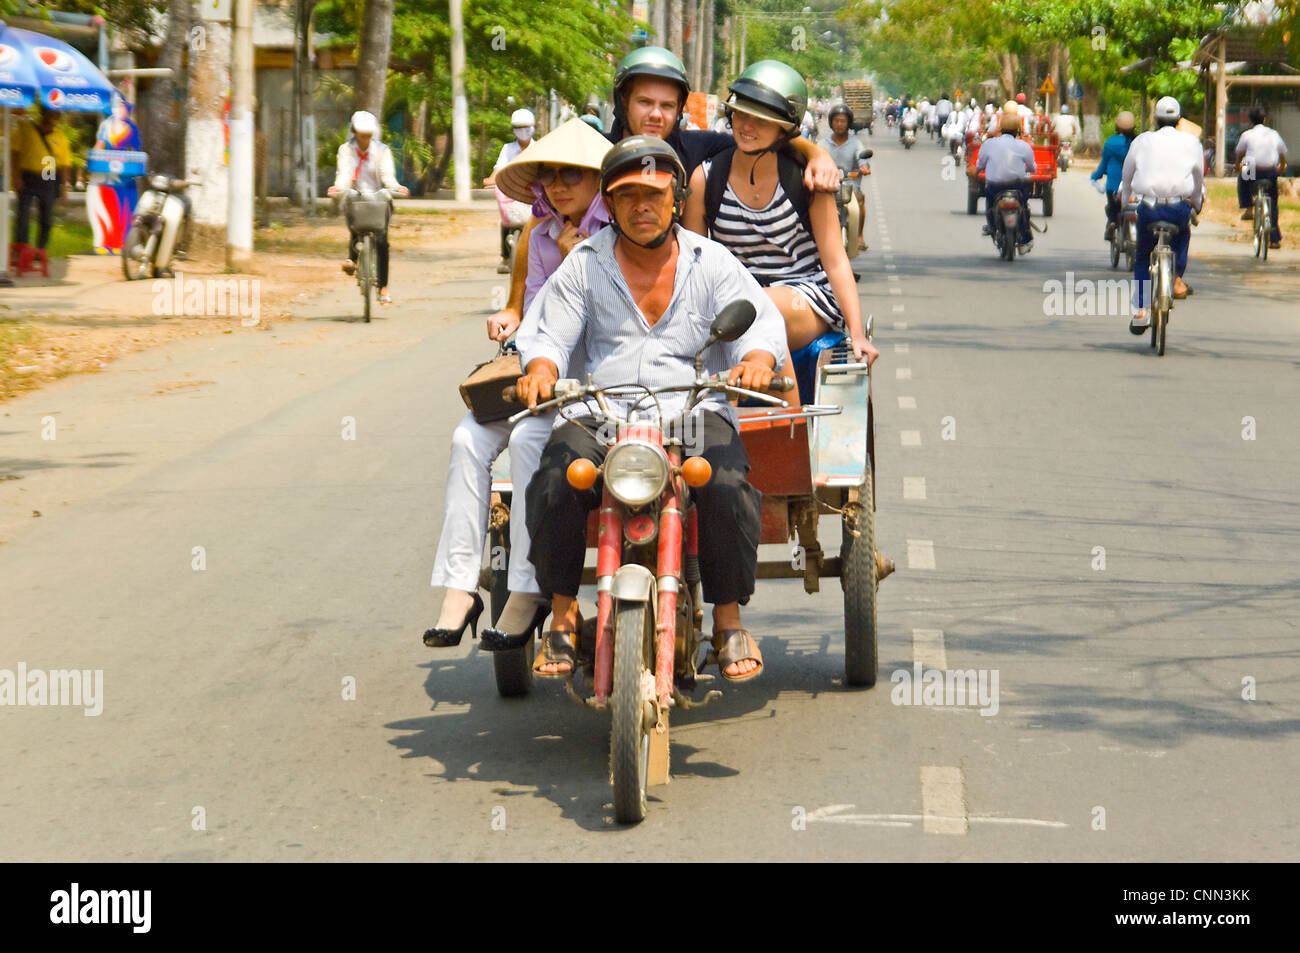 Horizontal portrait of a motorbike and trailer carrying Western tourists and a Vietnamese lady sharing a ride along a busy road. Stock Photo